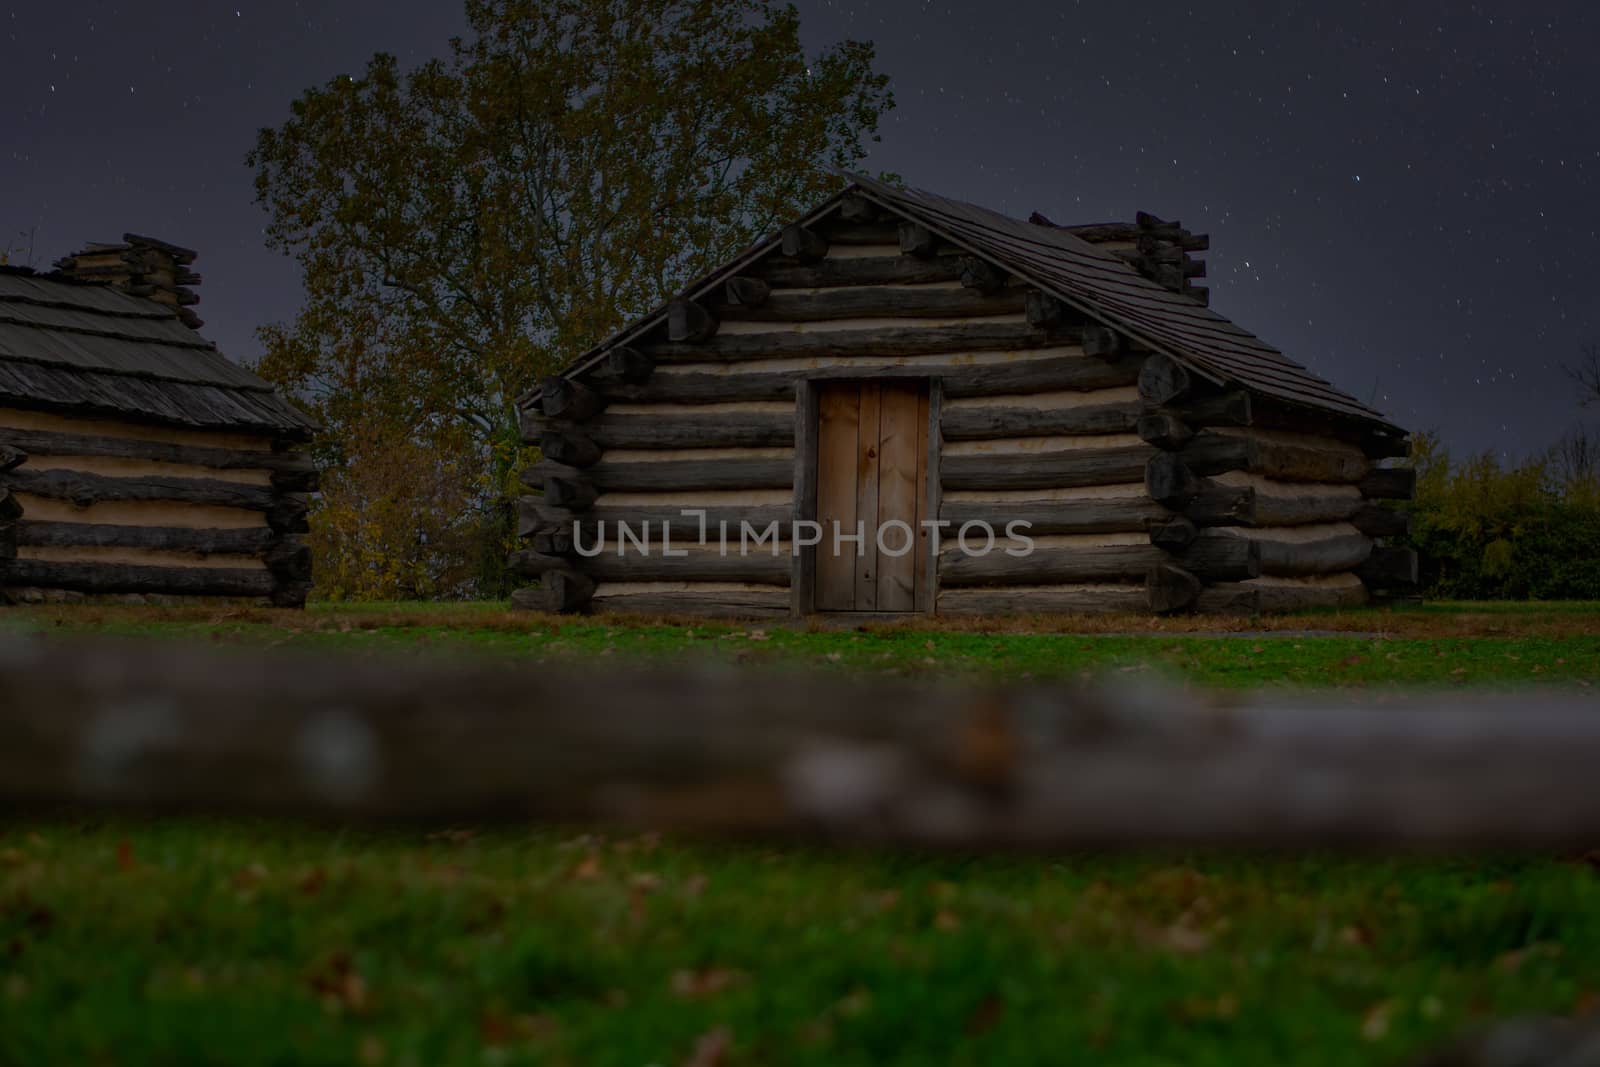 Reproduction Log Cabins at Valley Forge National Historical Park With a Night Sky Full of Stars Behind